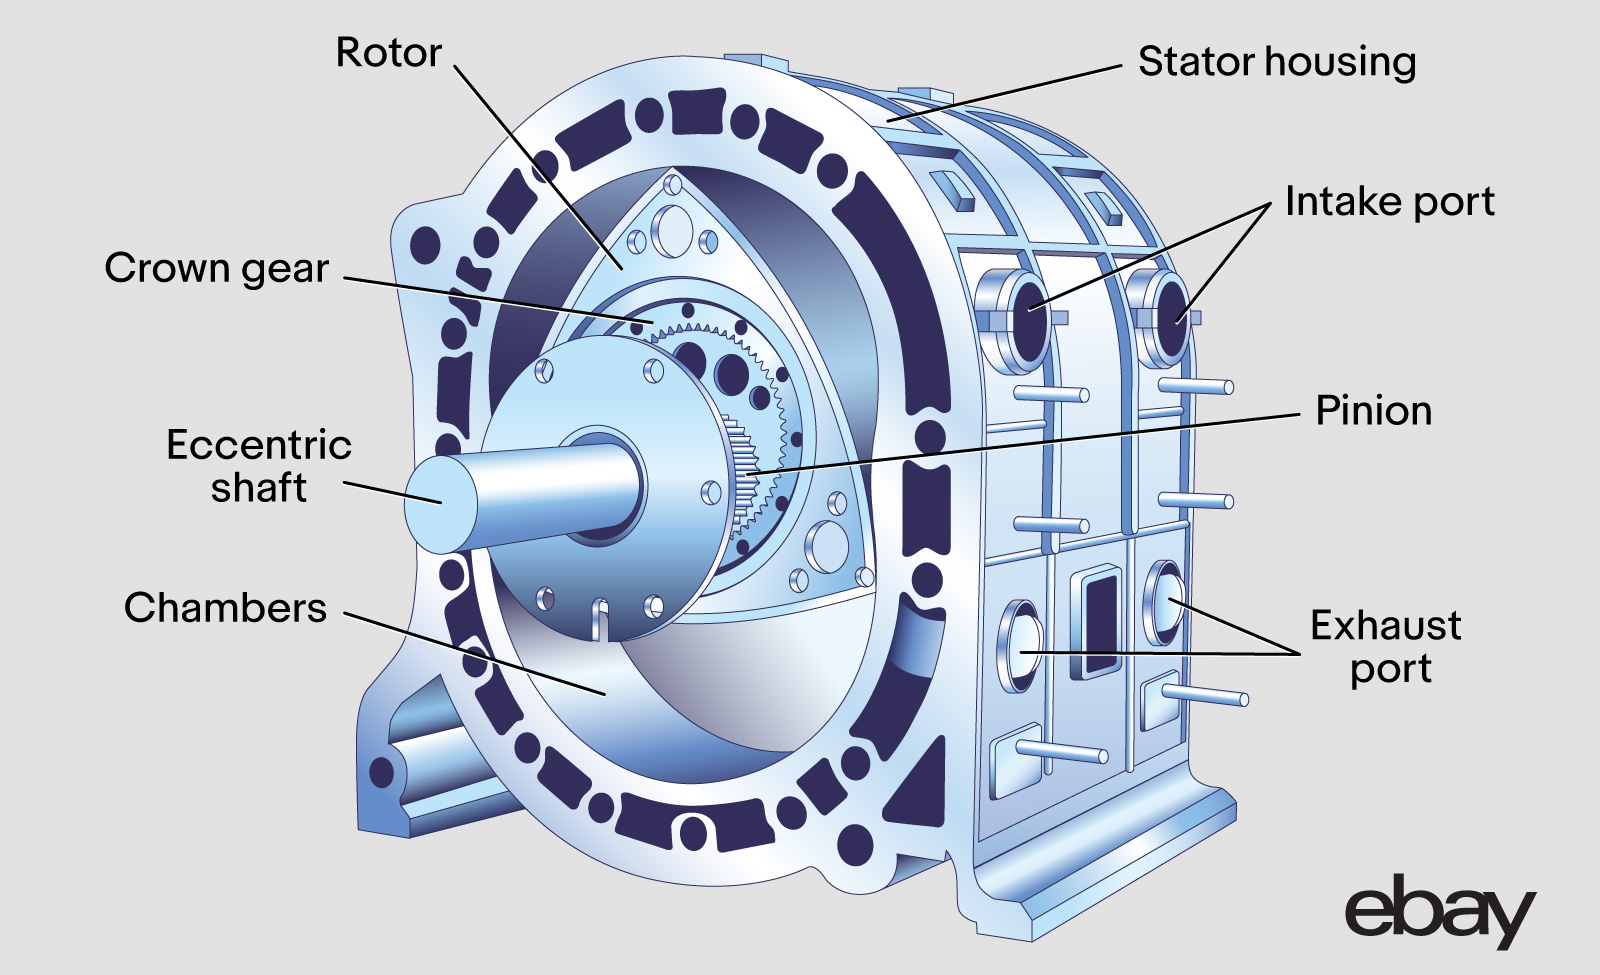 Illustration of rotary engine components